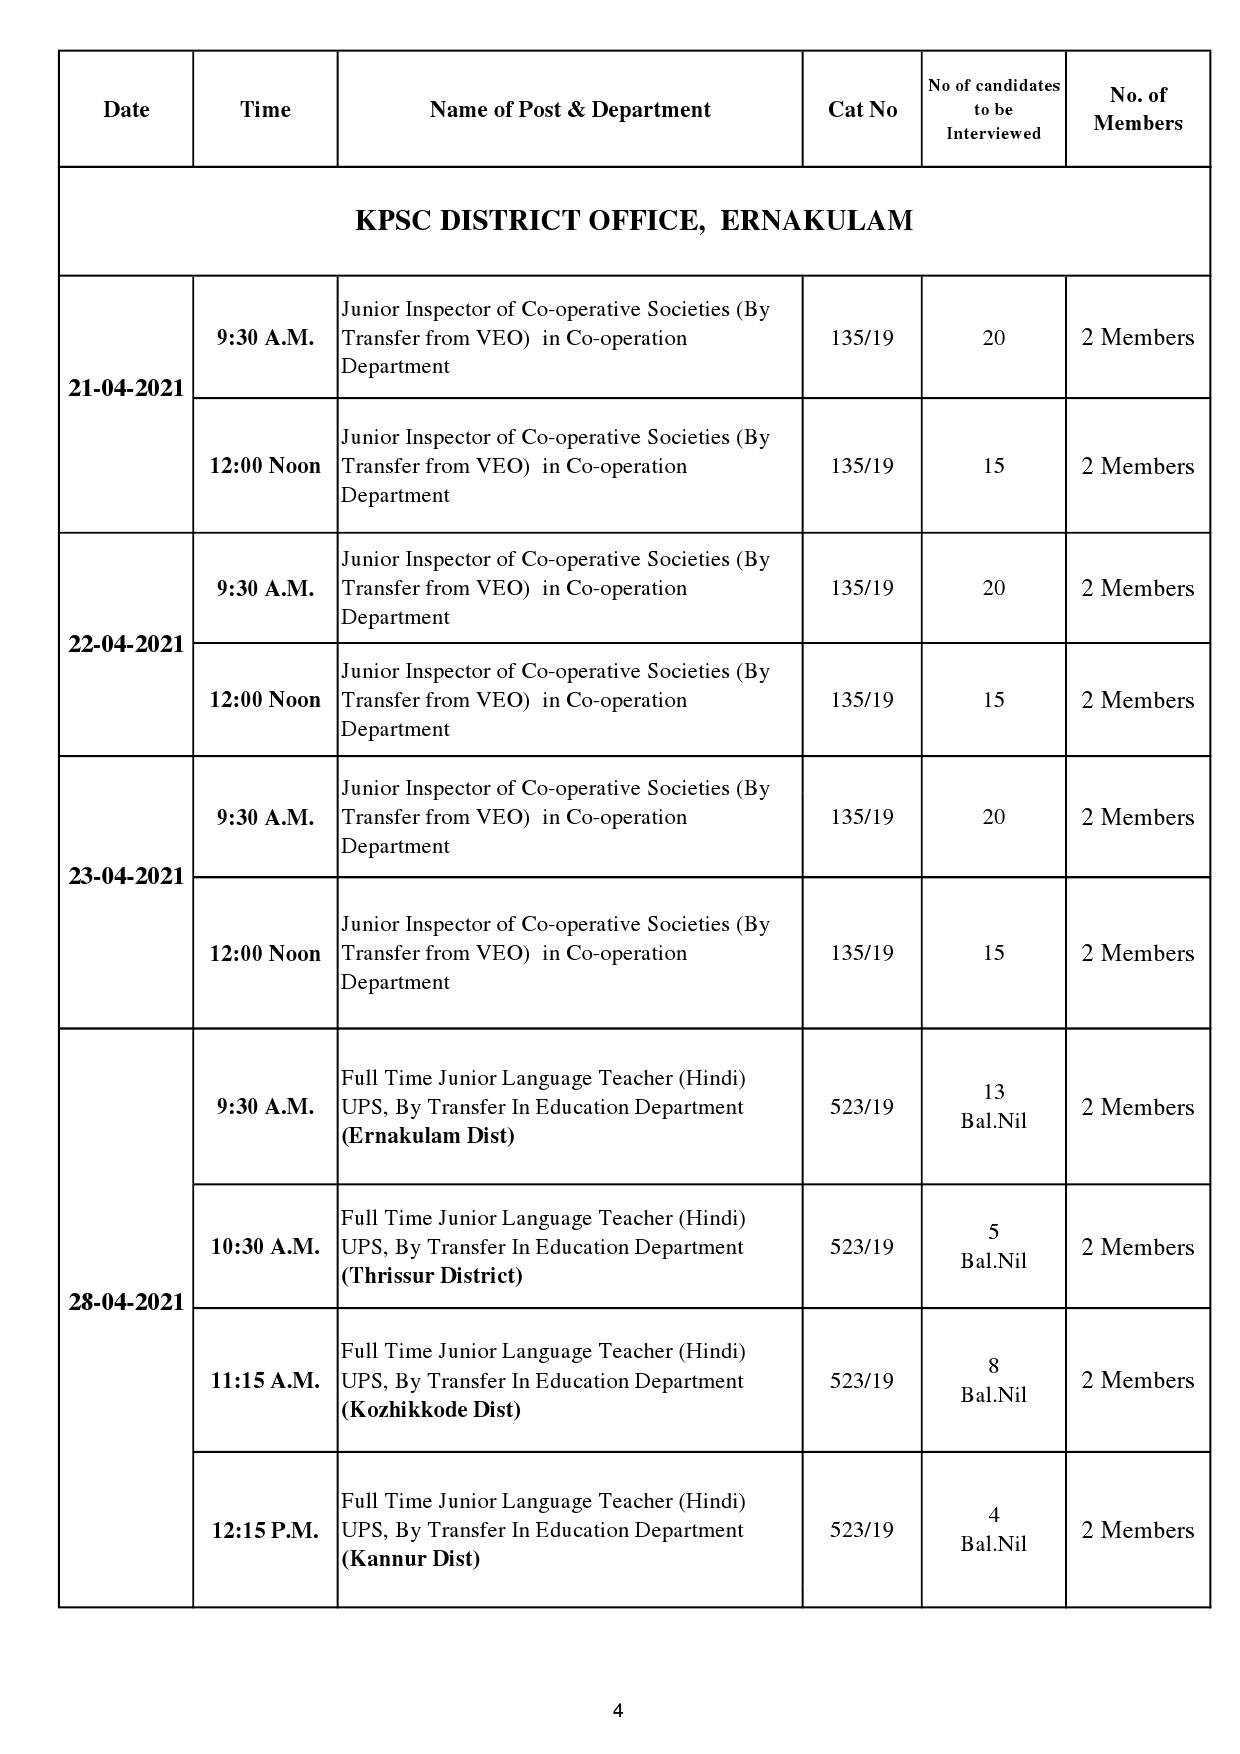 REVISED INTERVIEW PROGRAMME FOR THE MONTH OF APRIL 2021 - Notification Image 4